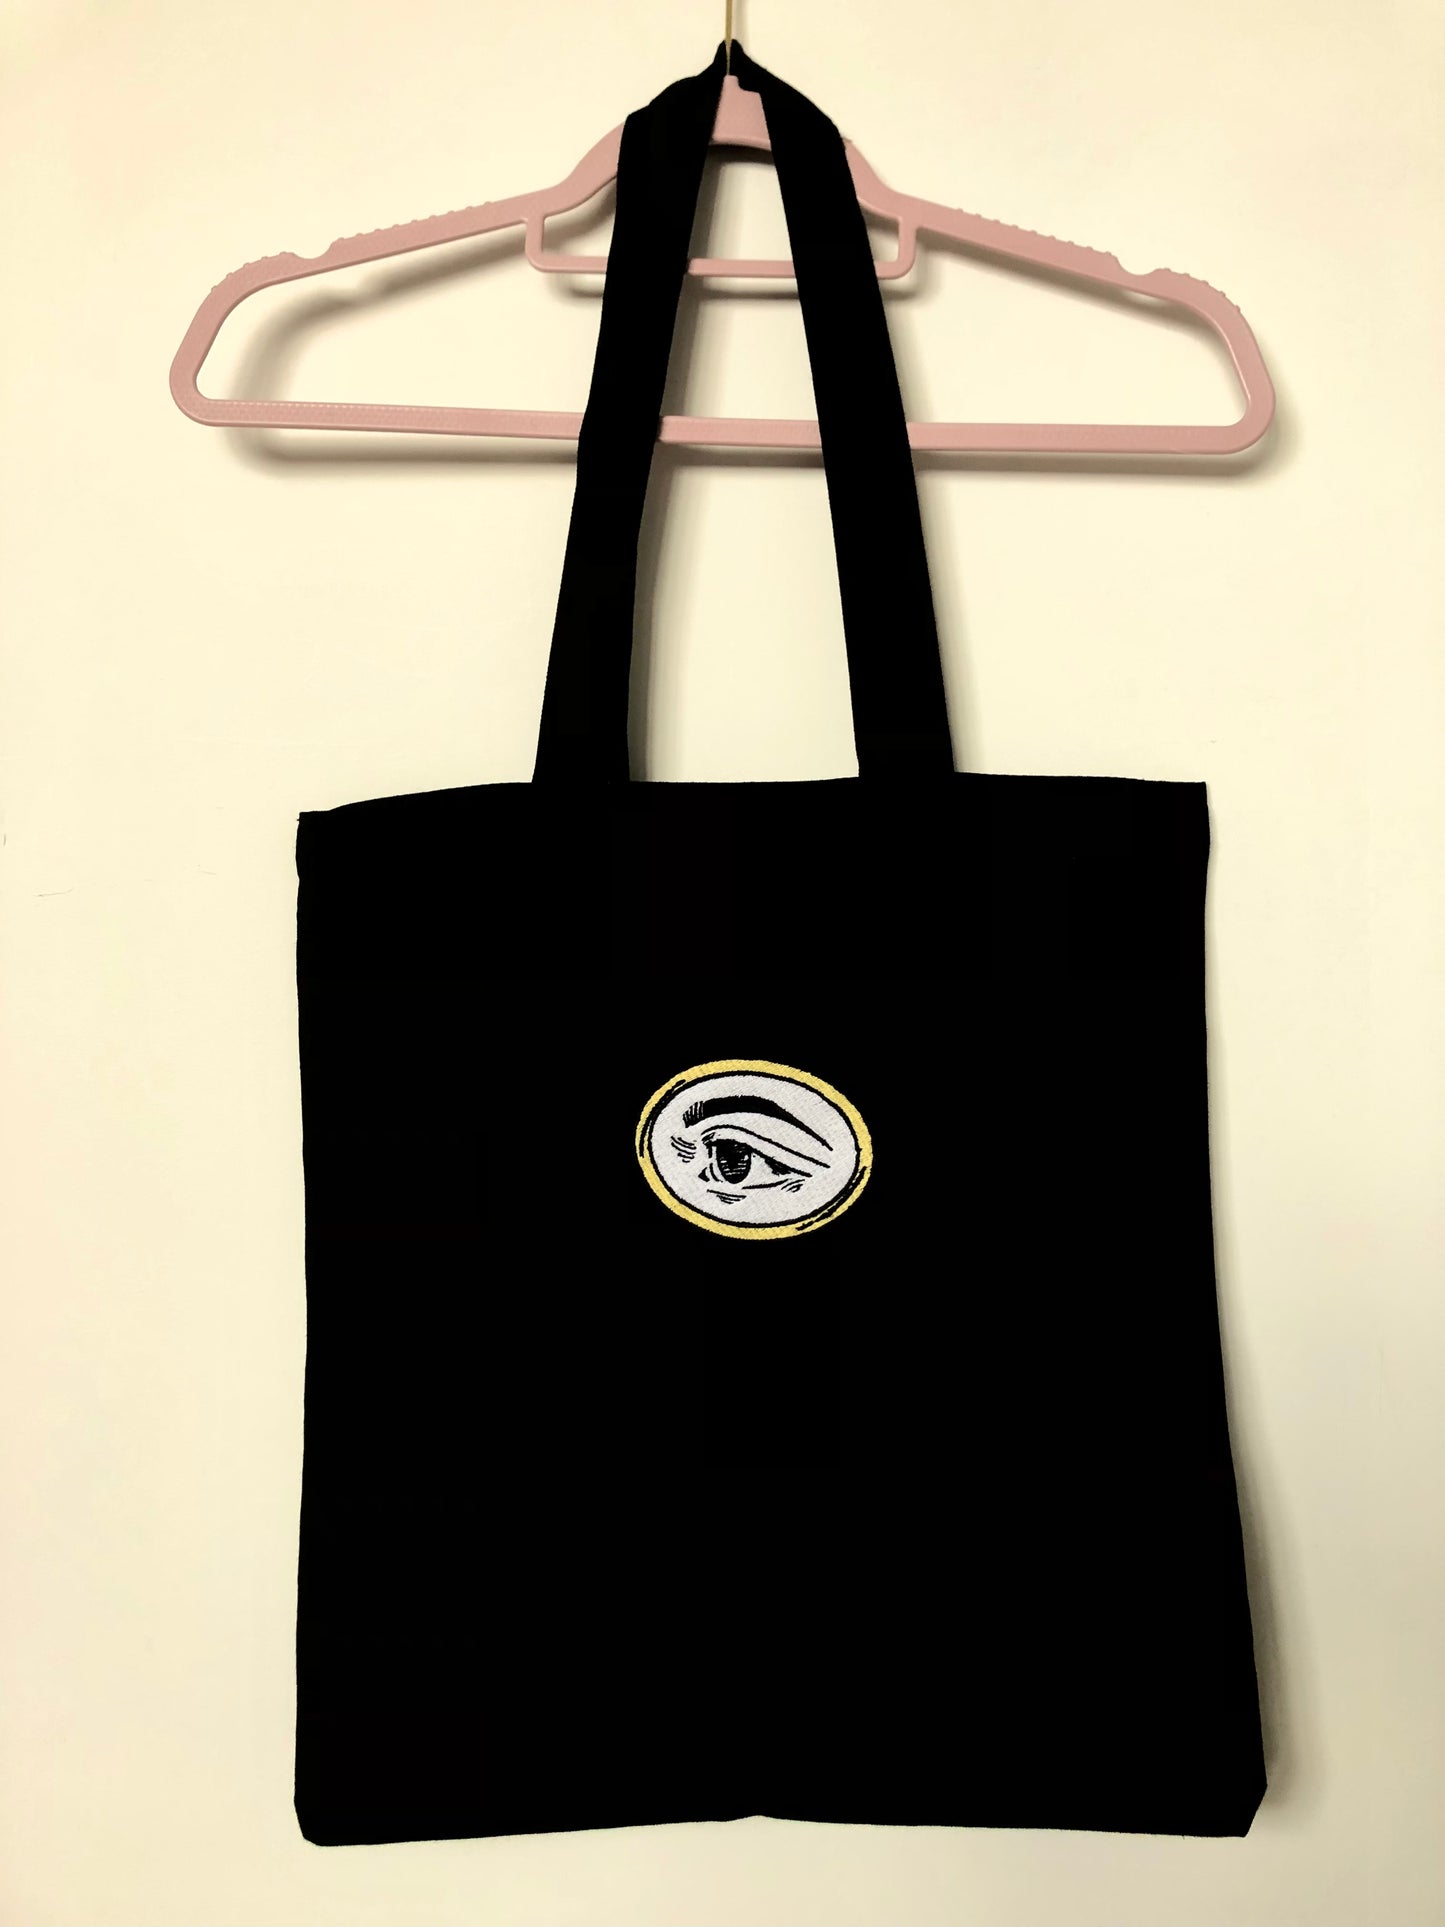 The Lover's Eye Tote